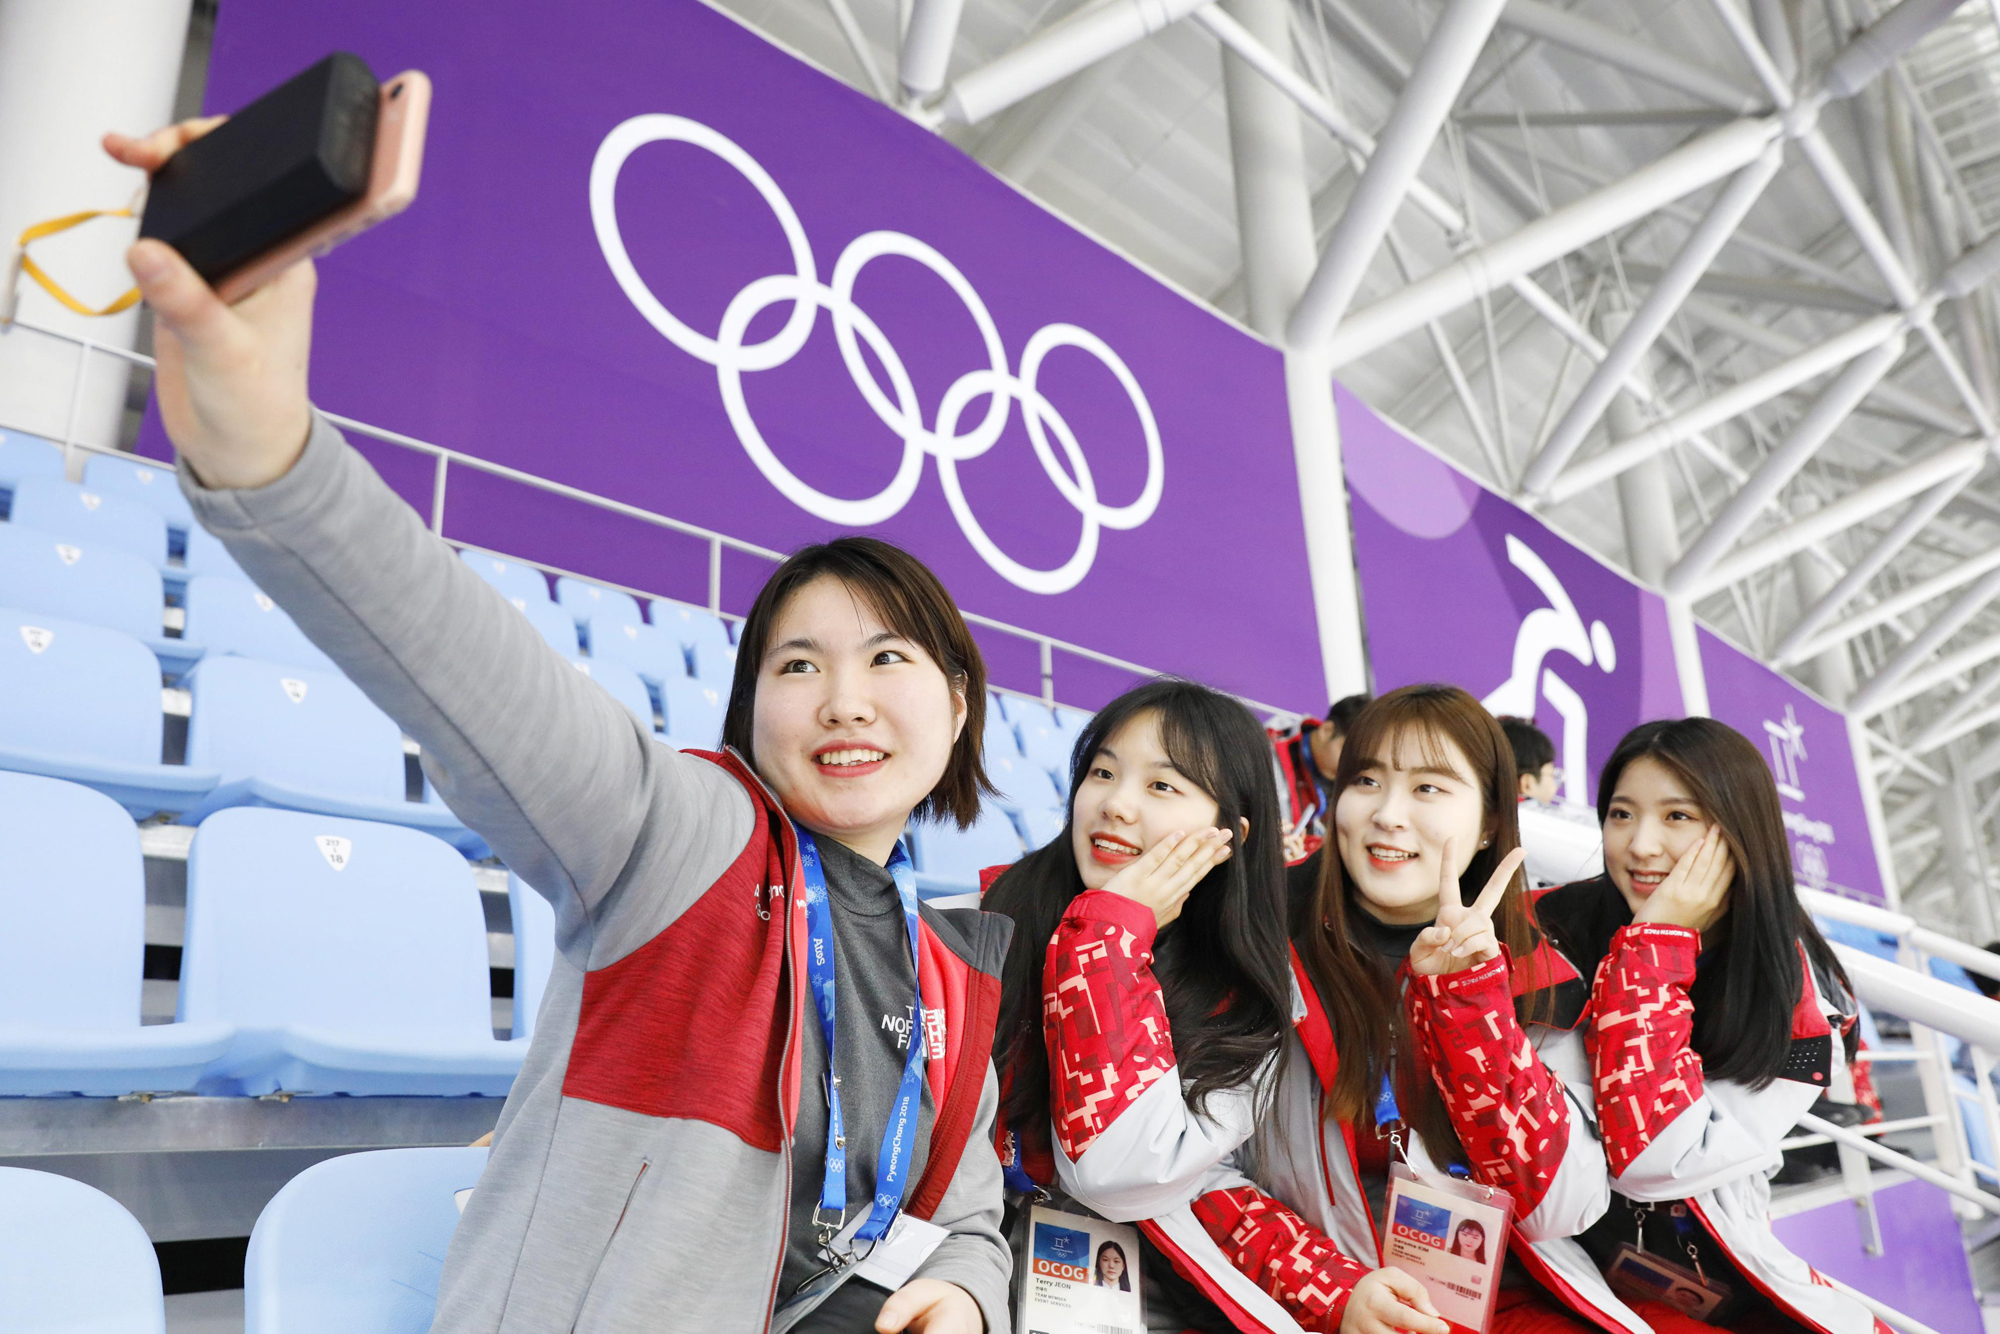 Volunteer workers take selfies at the speedskating venue for the Pyeongchang Winter Olympics in Gangneung, South Korea, on Feb. 8, 2018, the day before the games opened. | KYODO